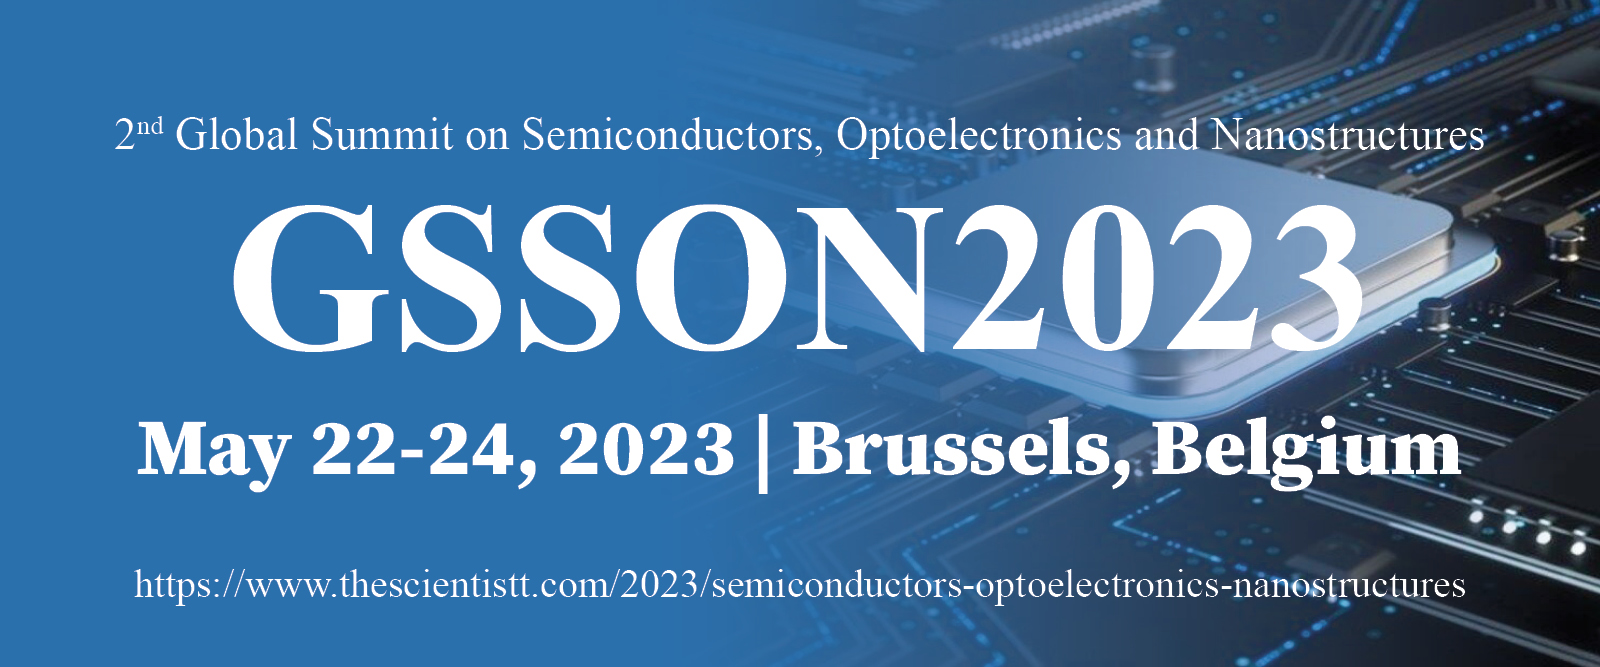 2nd Global Summit on Semiconductors, Optoelectronics and Nanostructures